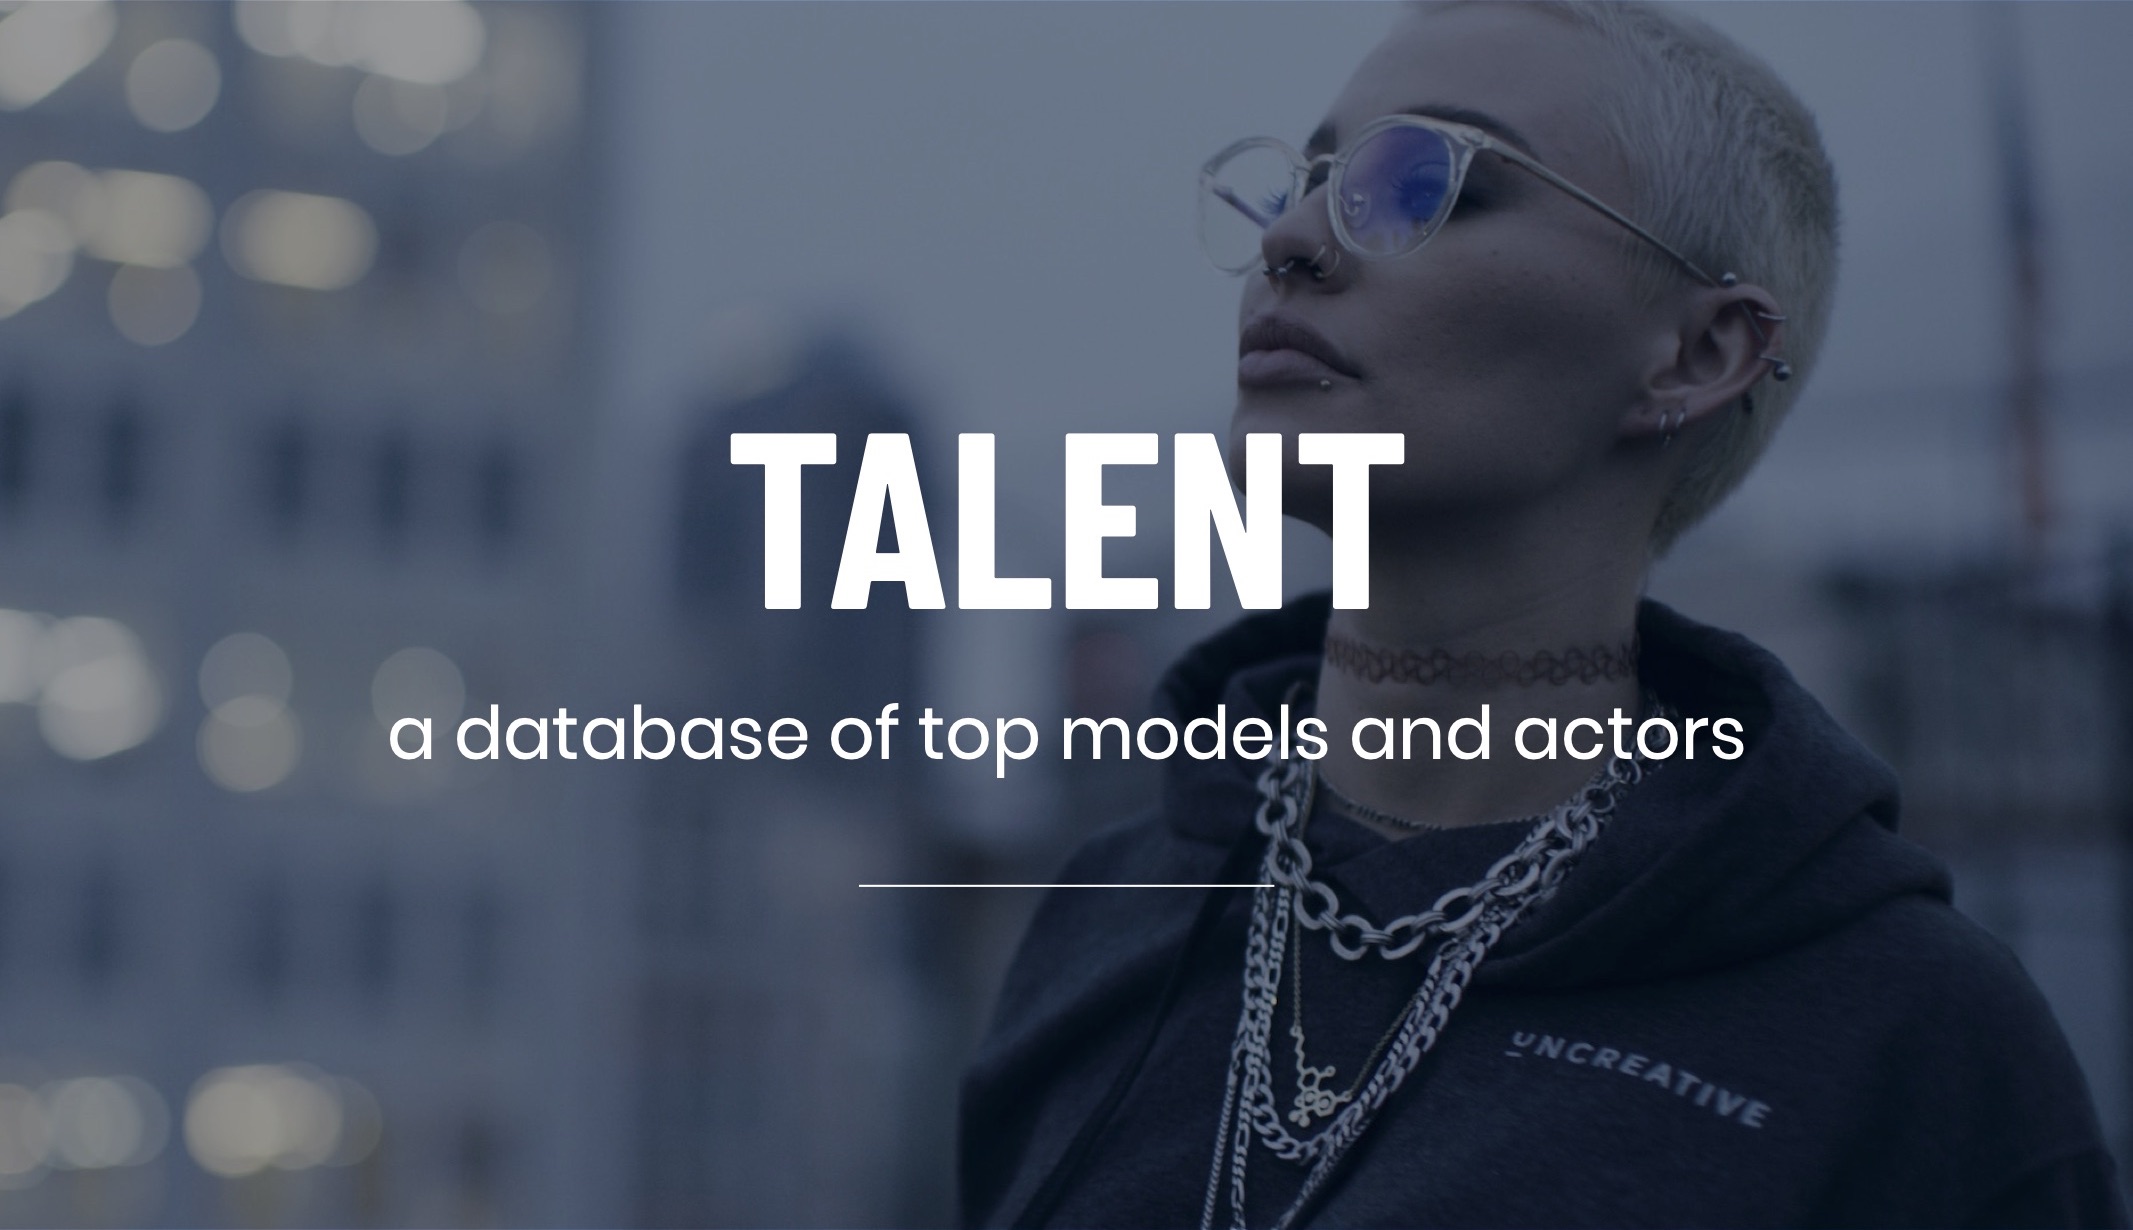 Production Resources White Talent a database of top models and actors title on backdrop of woman with short hair and face piercings posing for camera